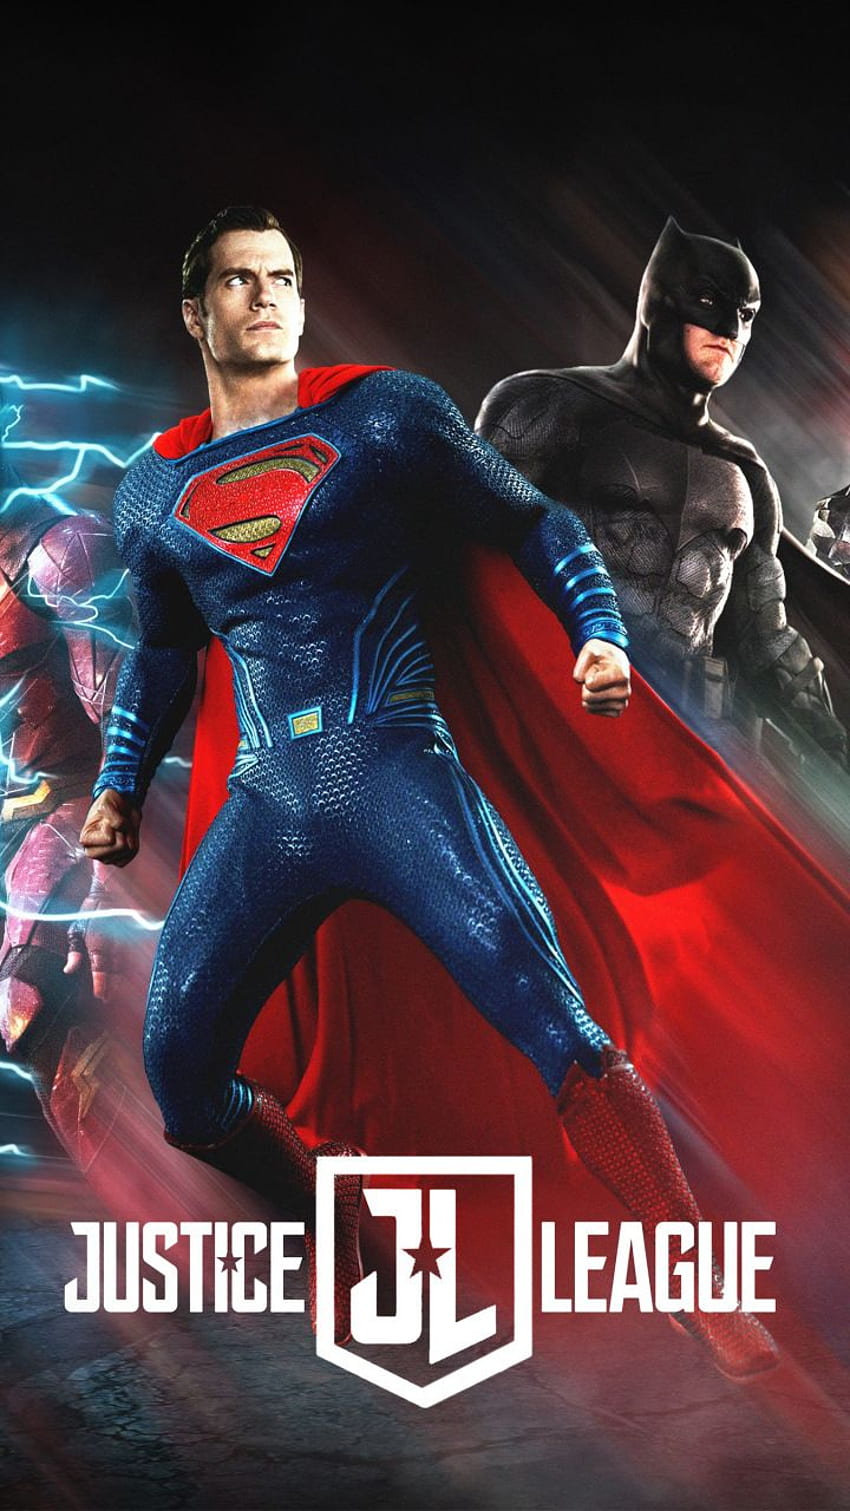 Justice league, fan art, movie, poster, . Justice league, Movie , Batman poster, Justice League Superman HD phone wallpaper